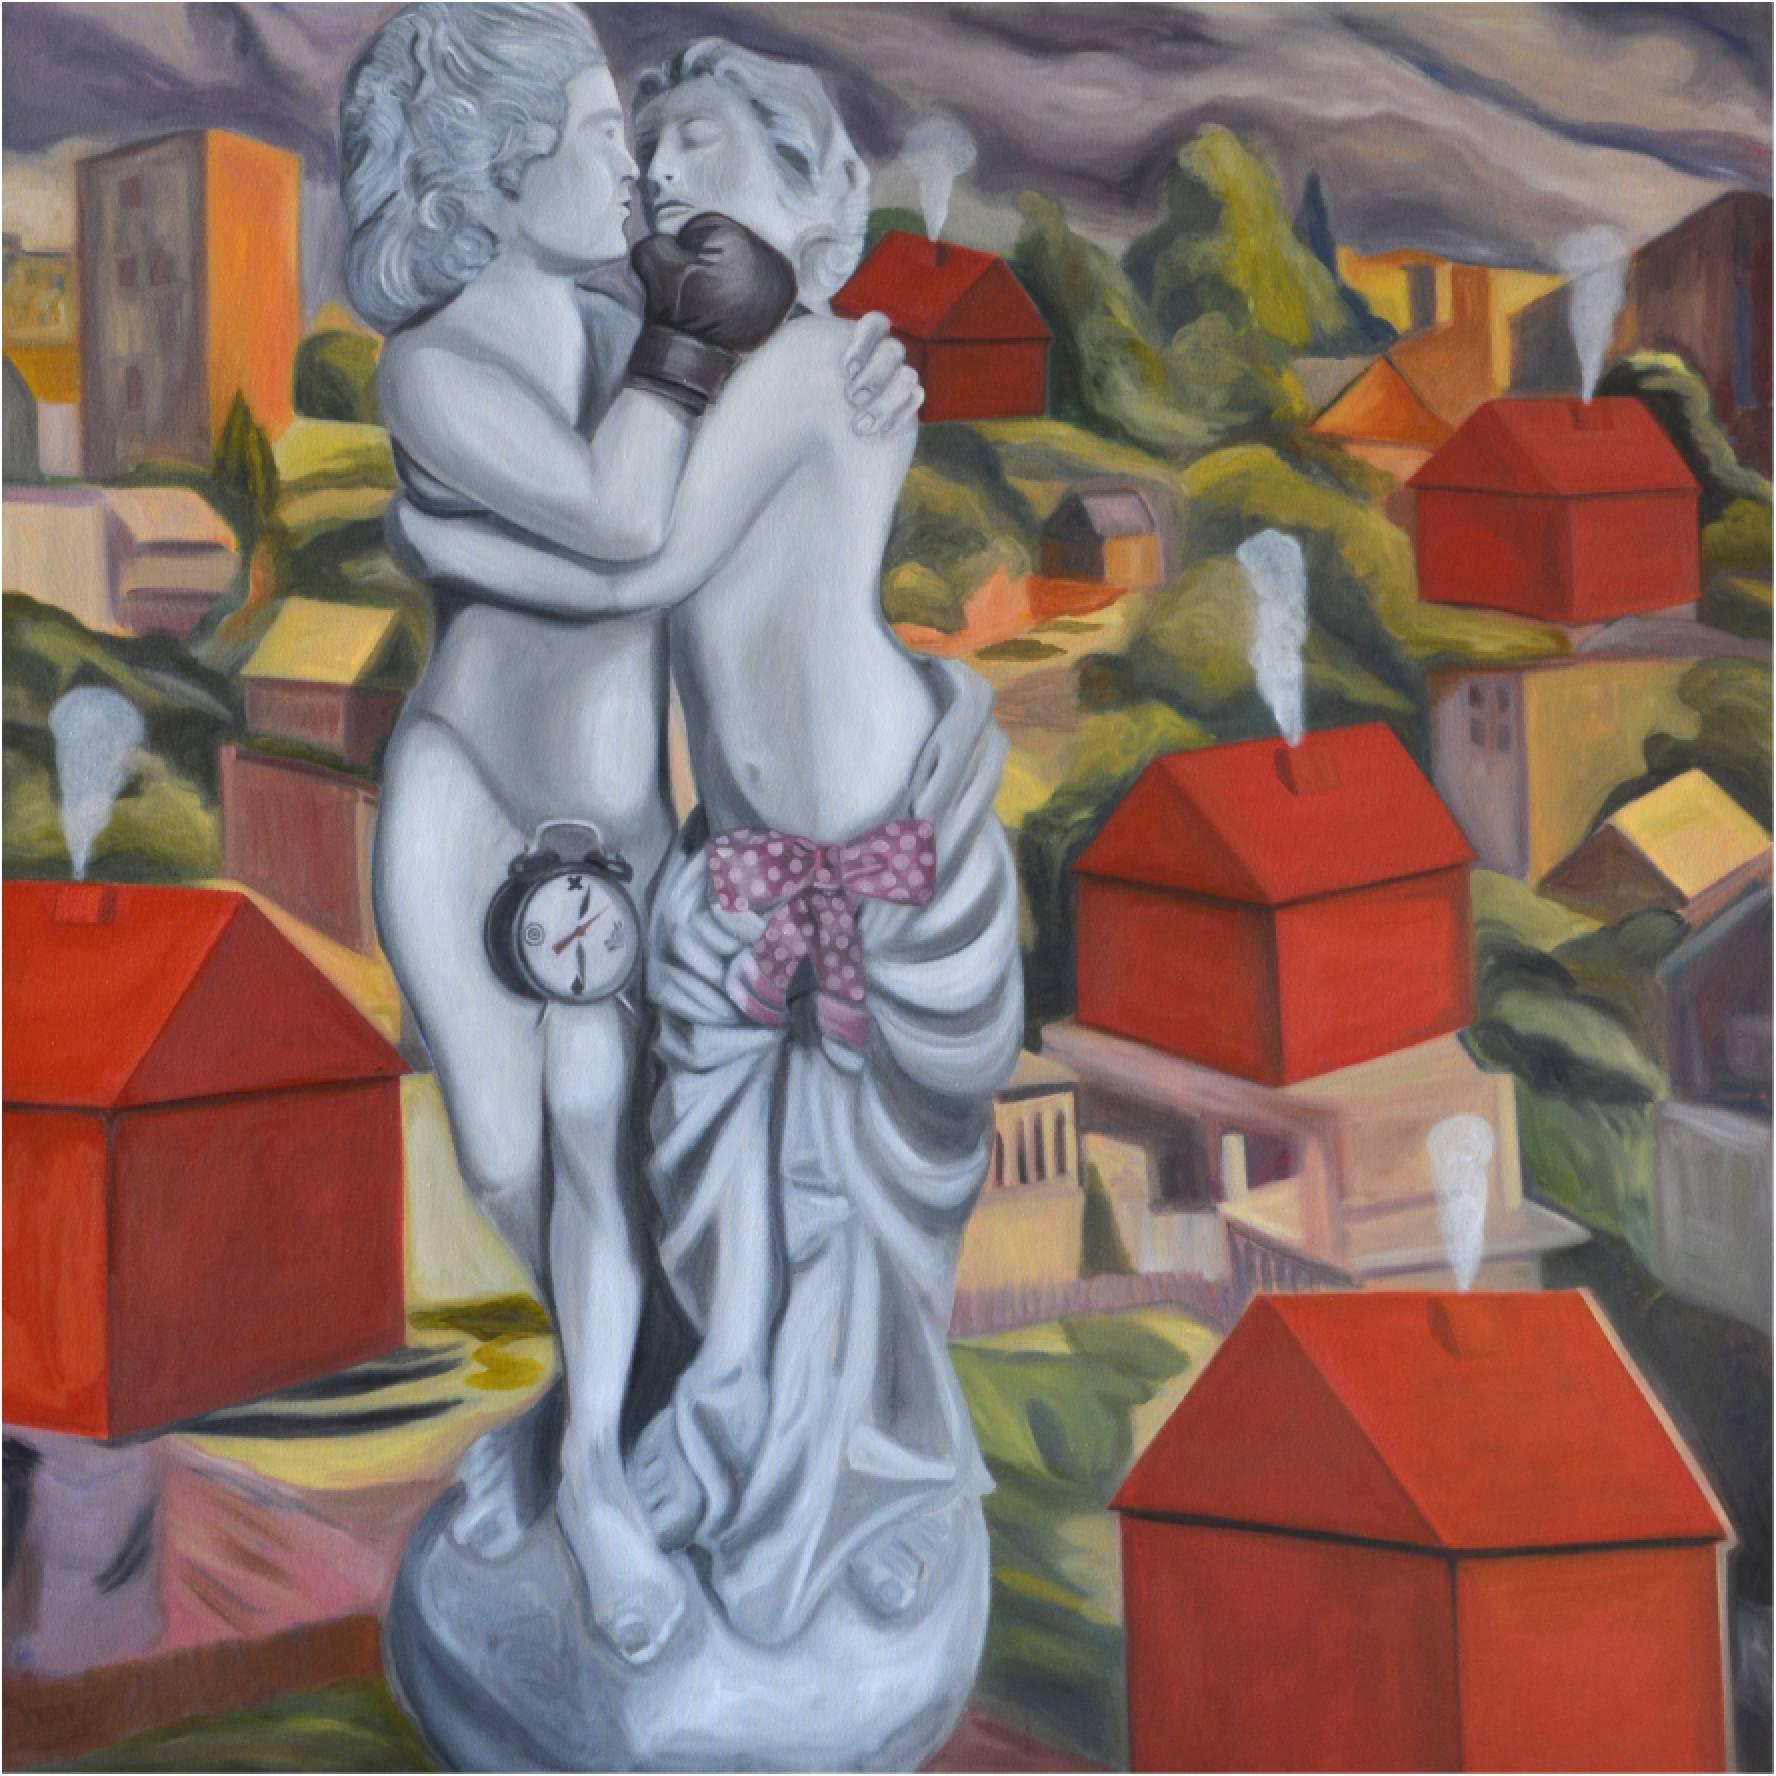 Barry Wolfryd Figurative Painting - Factories of Love, Oil, Encaustic on Canvas, Contemporary Art